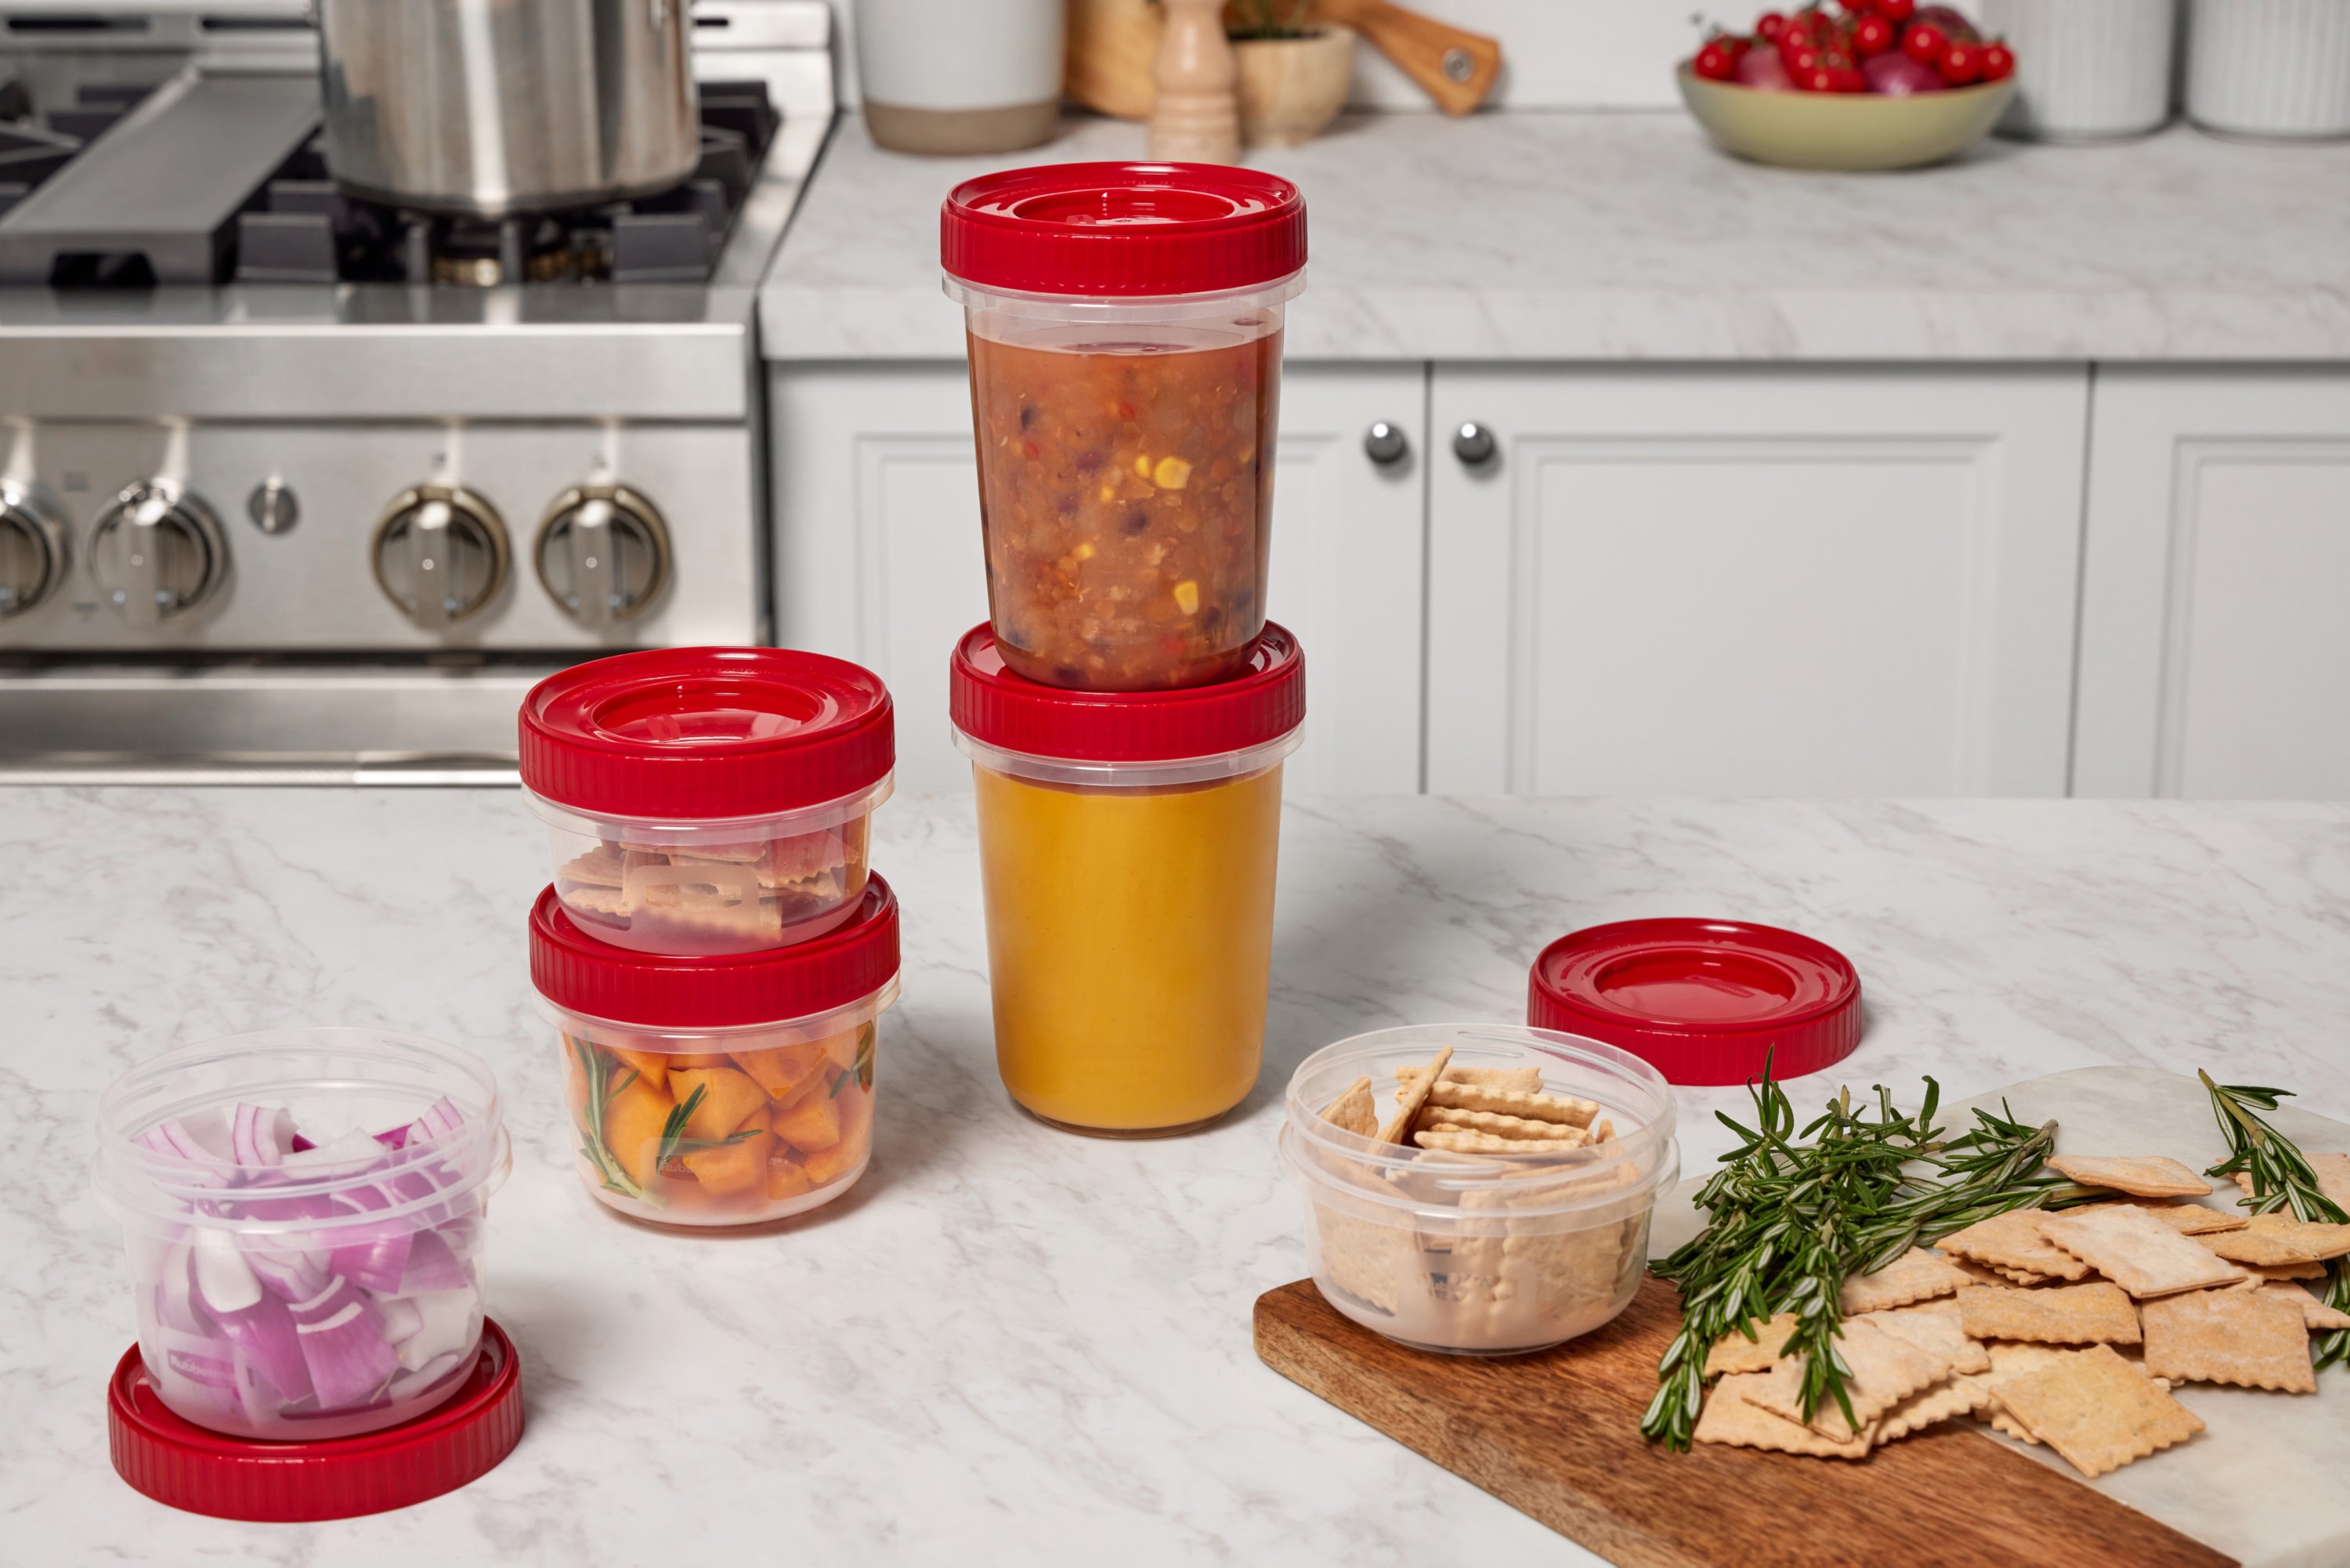 Rubbermaid TakeAlongs Twist-&-Seal 2.1 Cup Meal Prep Food Storage  Containers NEW